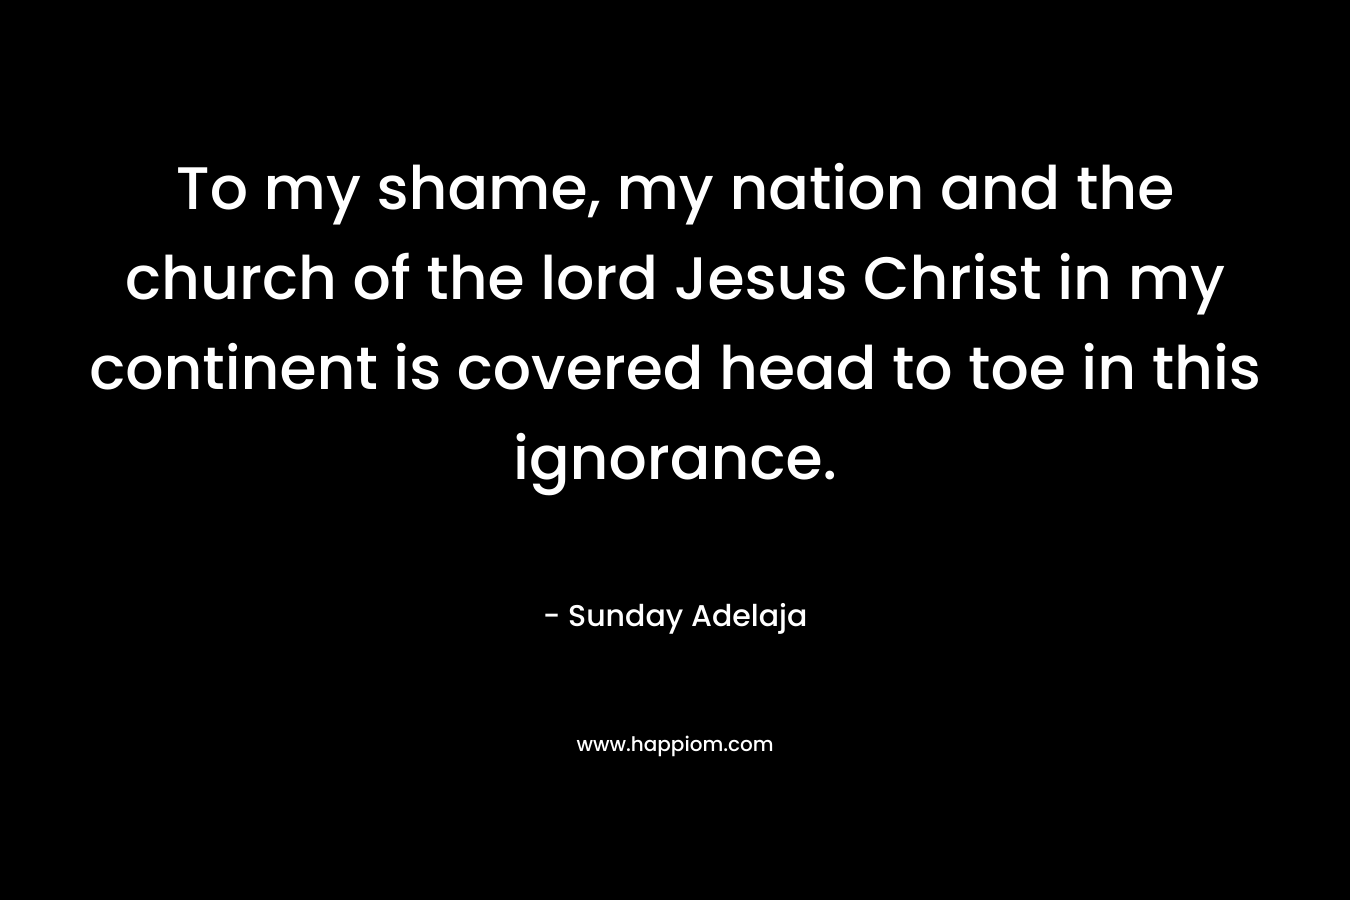 To my shame, my nation and the church of the lord Jesus Christ in my continent is covered head to toe in this ignorance. – Sunday Adelaja